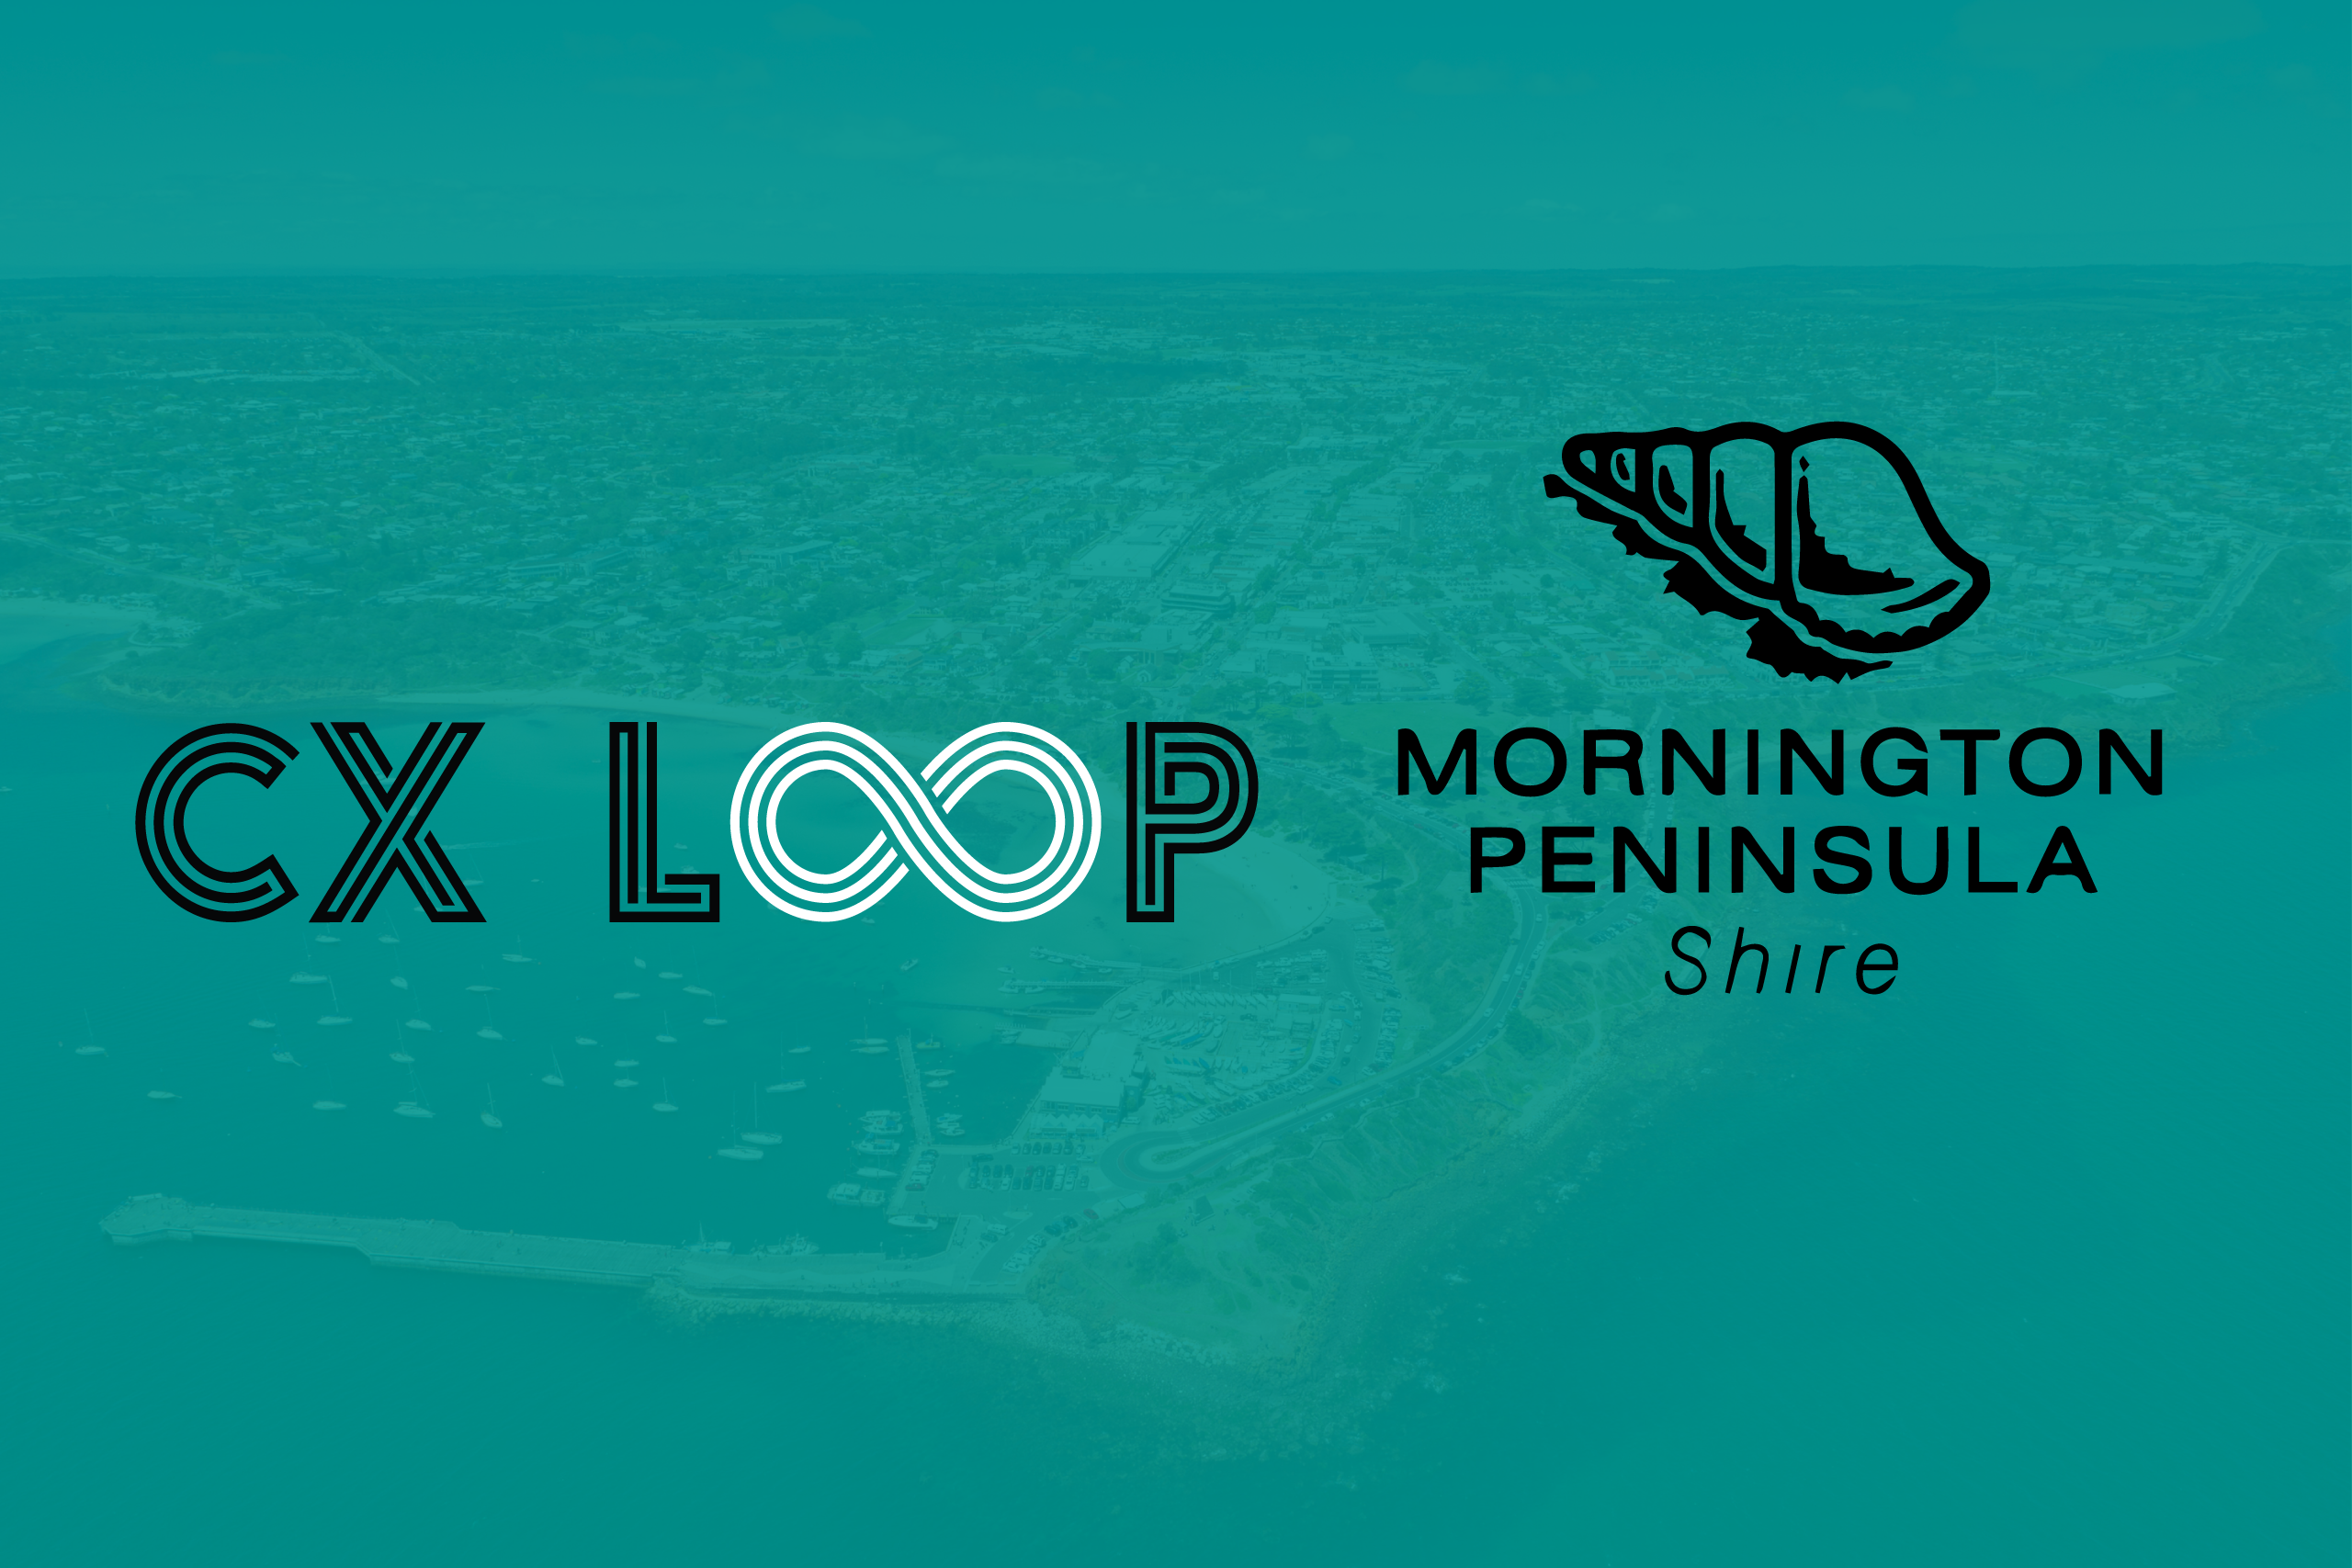 The CX LOOP logo next to The Mornington Peninsula Shire Logo on a green background overlaying an aerial shot of the Mornington peninsula.